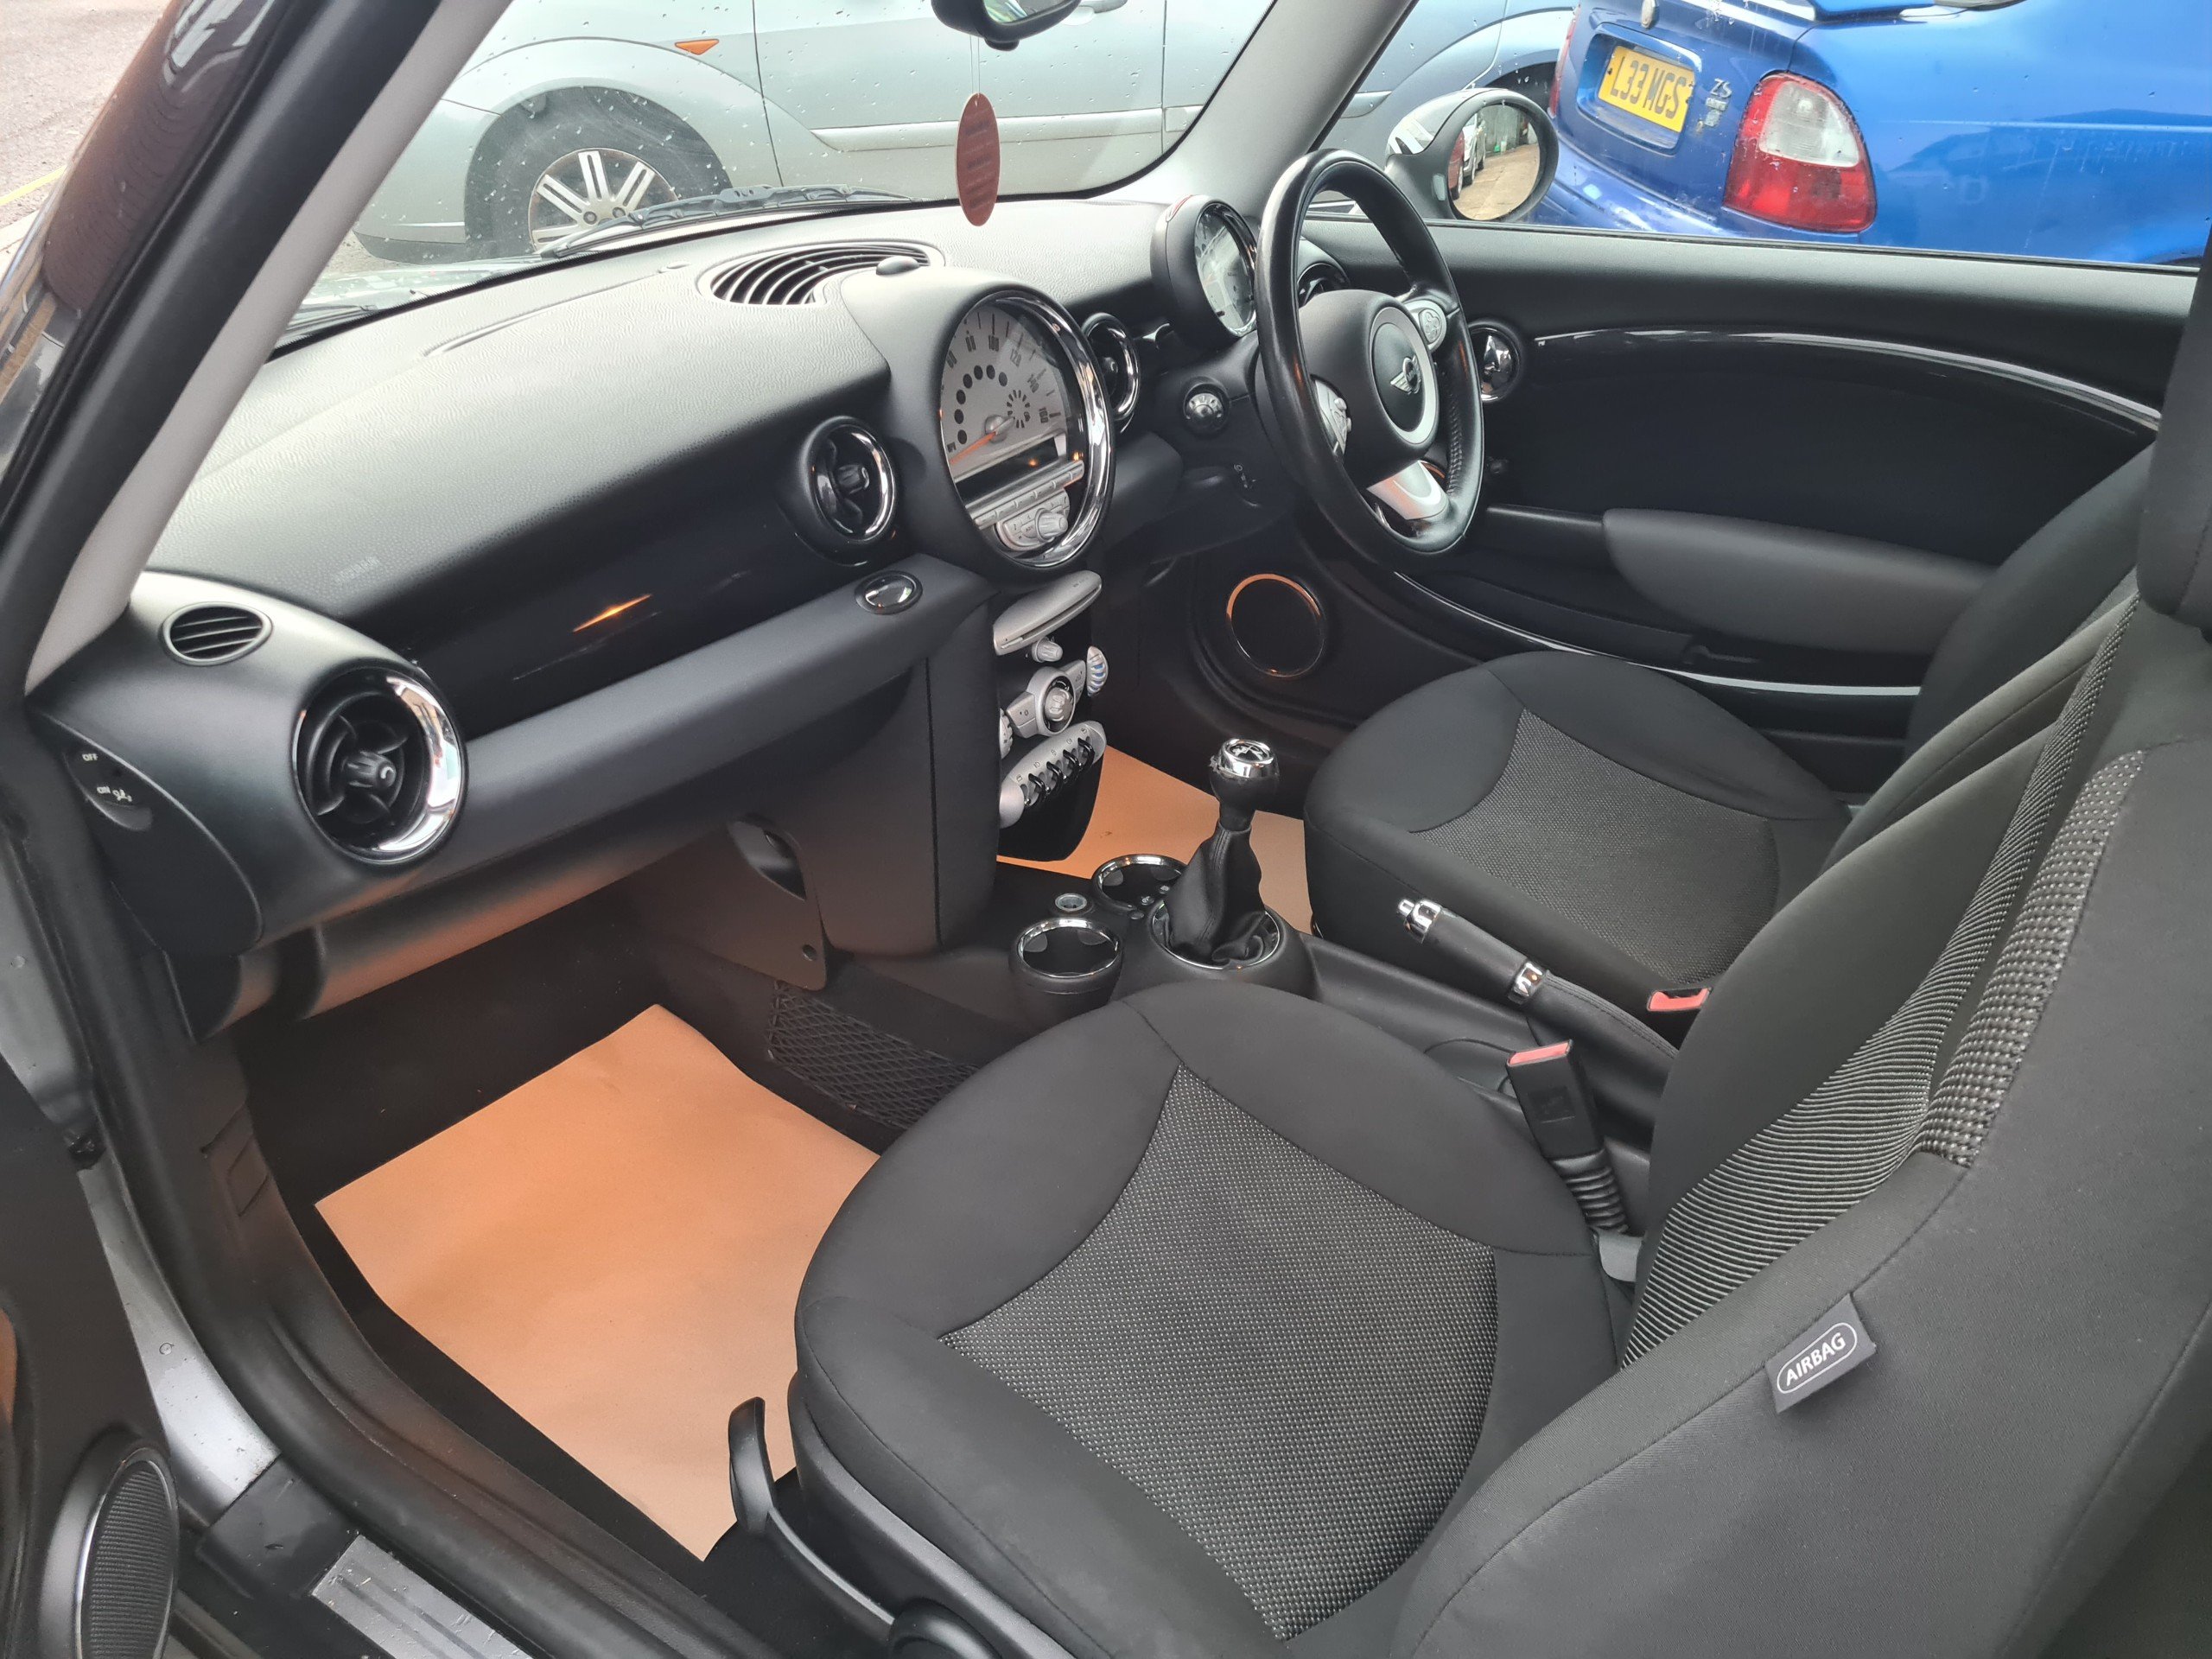 Used 2010 Mini Hatch One ONE GRAPHITE 3-Door for sale in Southampton ...